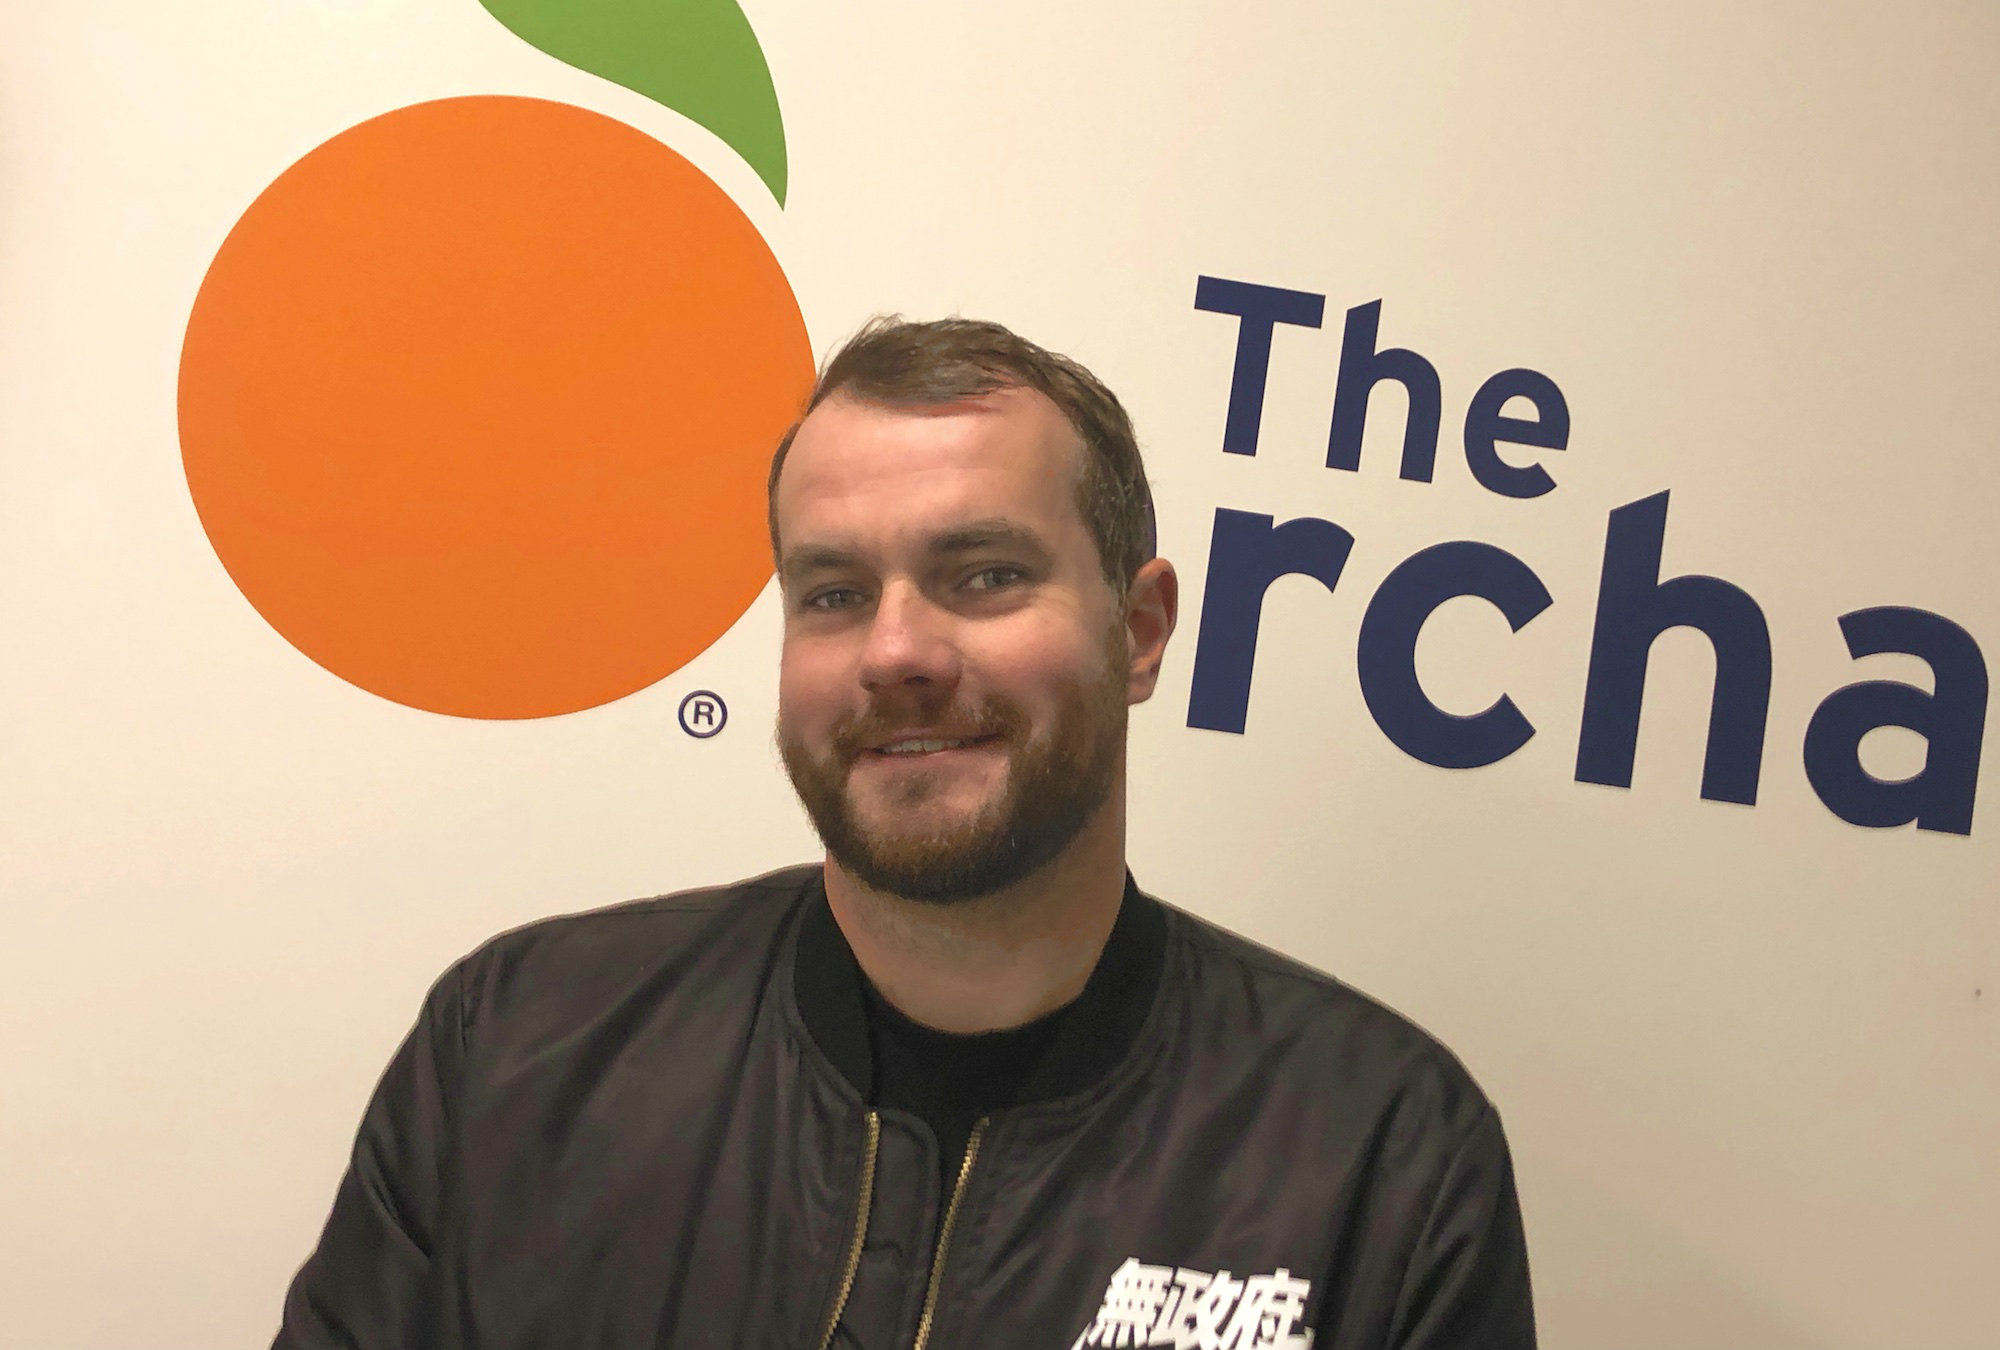 The Orchard names David Hume manager of artist services in Australia